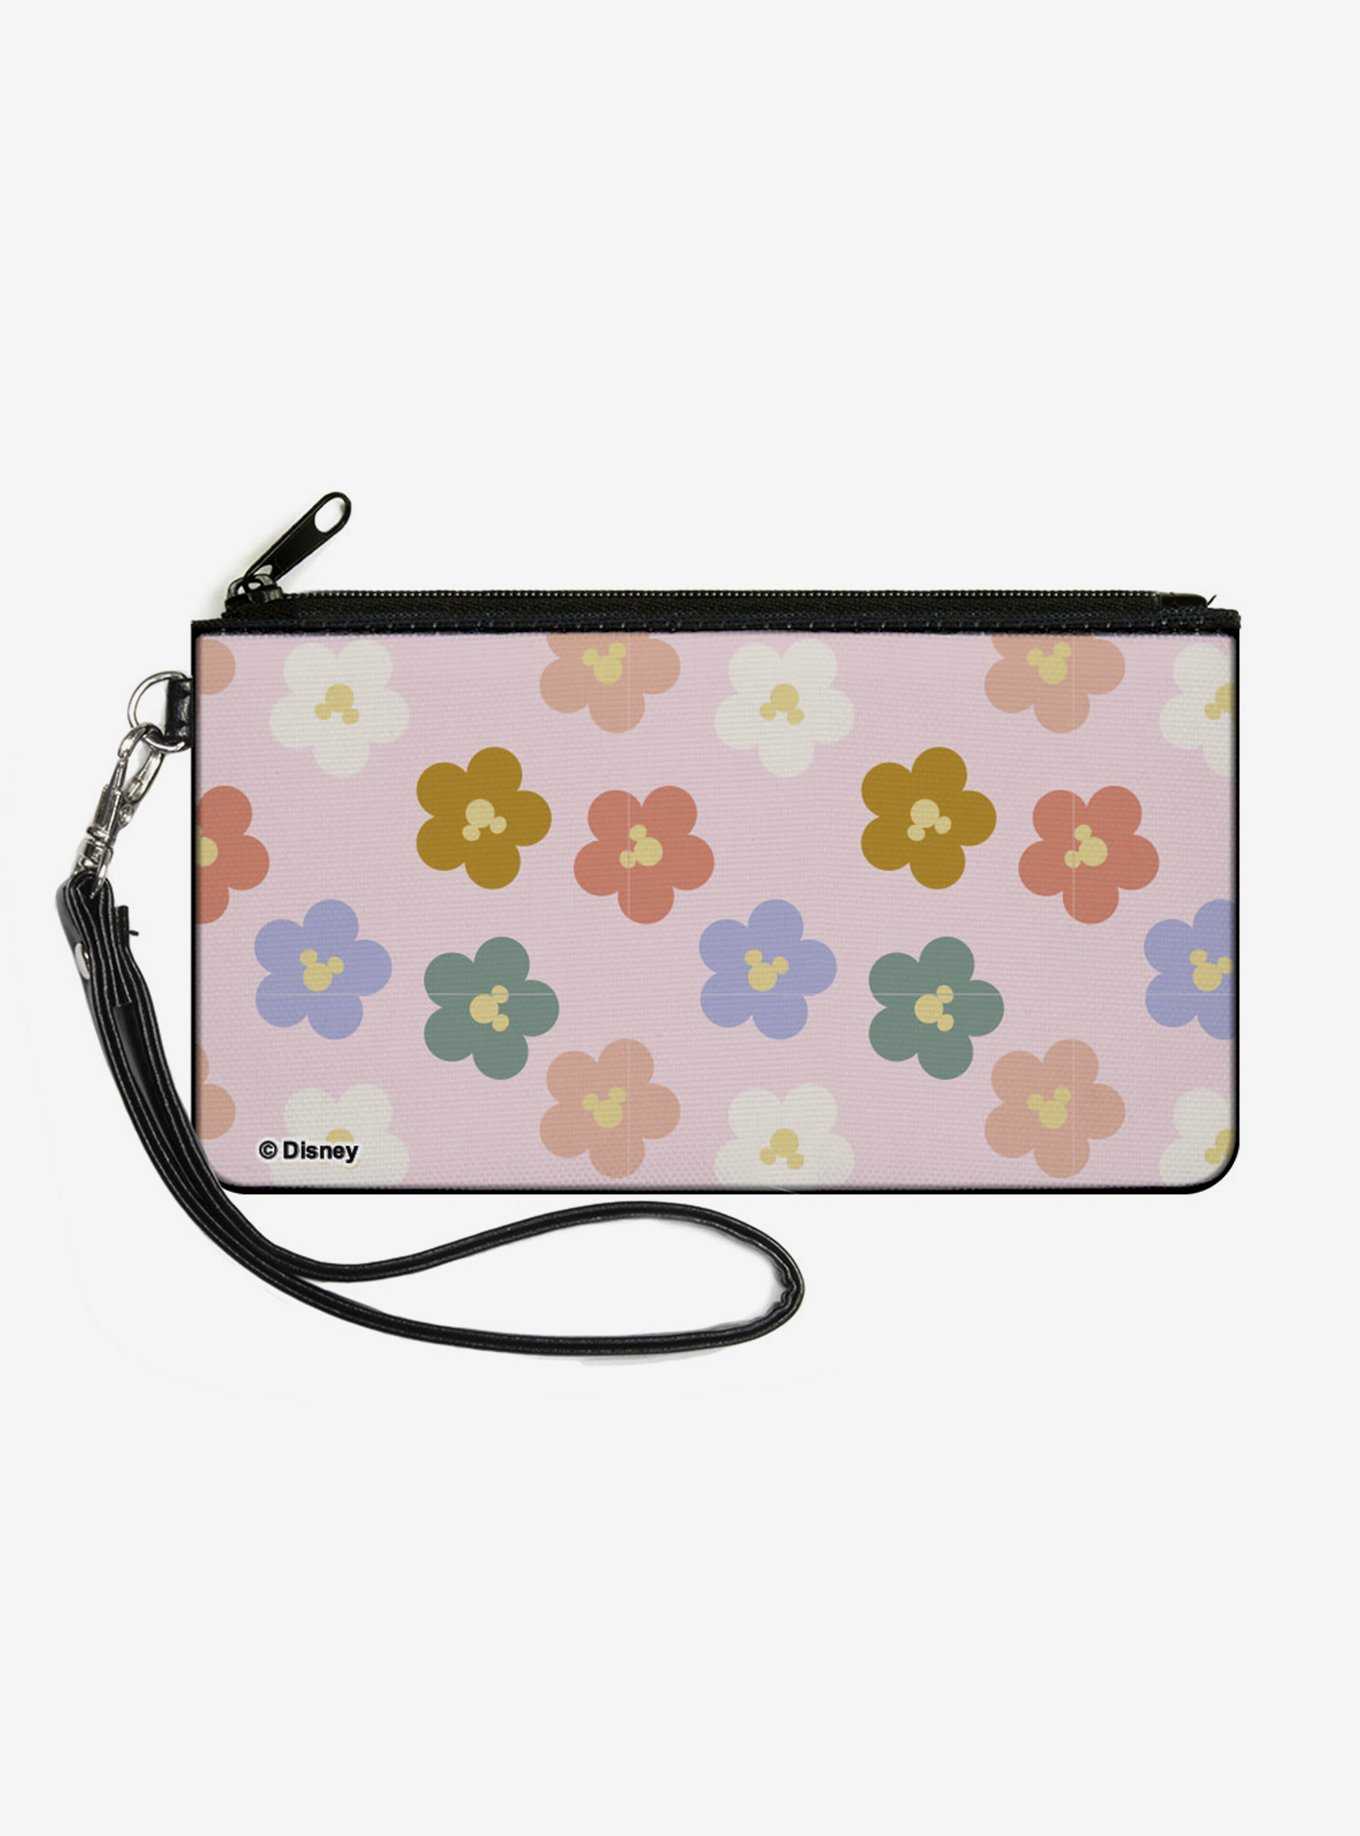 Disney Mickey Mouse Ears Icon Flowers Pastel Canvas Zip Clutch Wallet, , hi-res